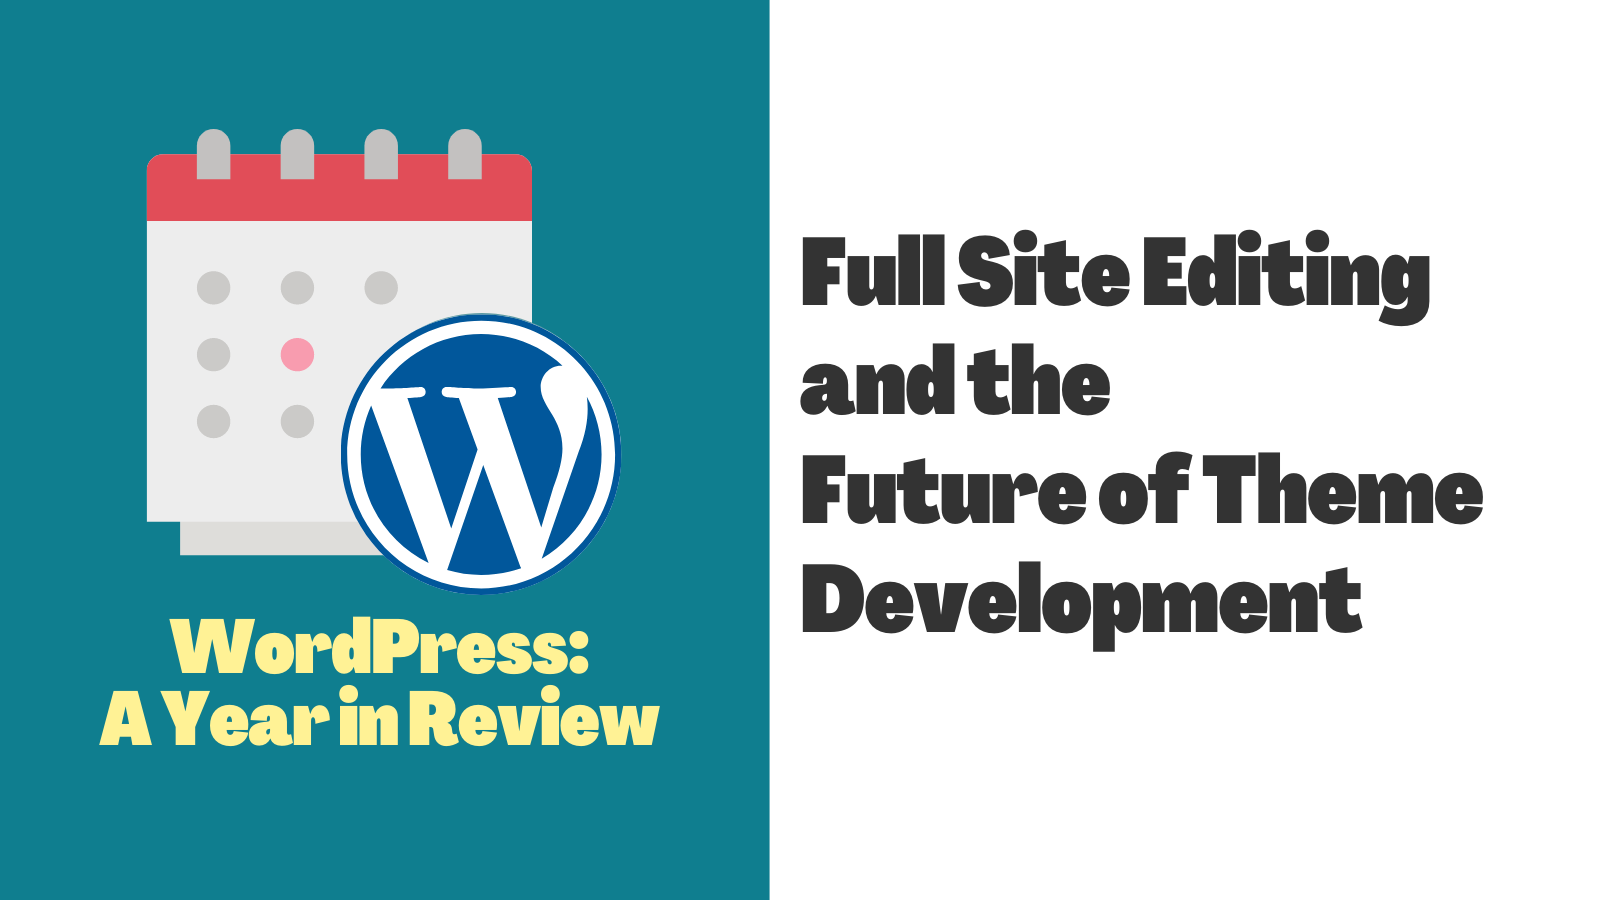 Full Site Editing and the Future of Theme Development